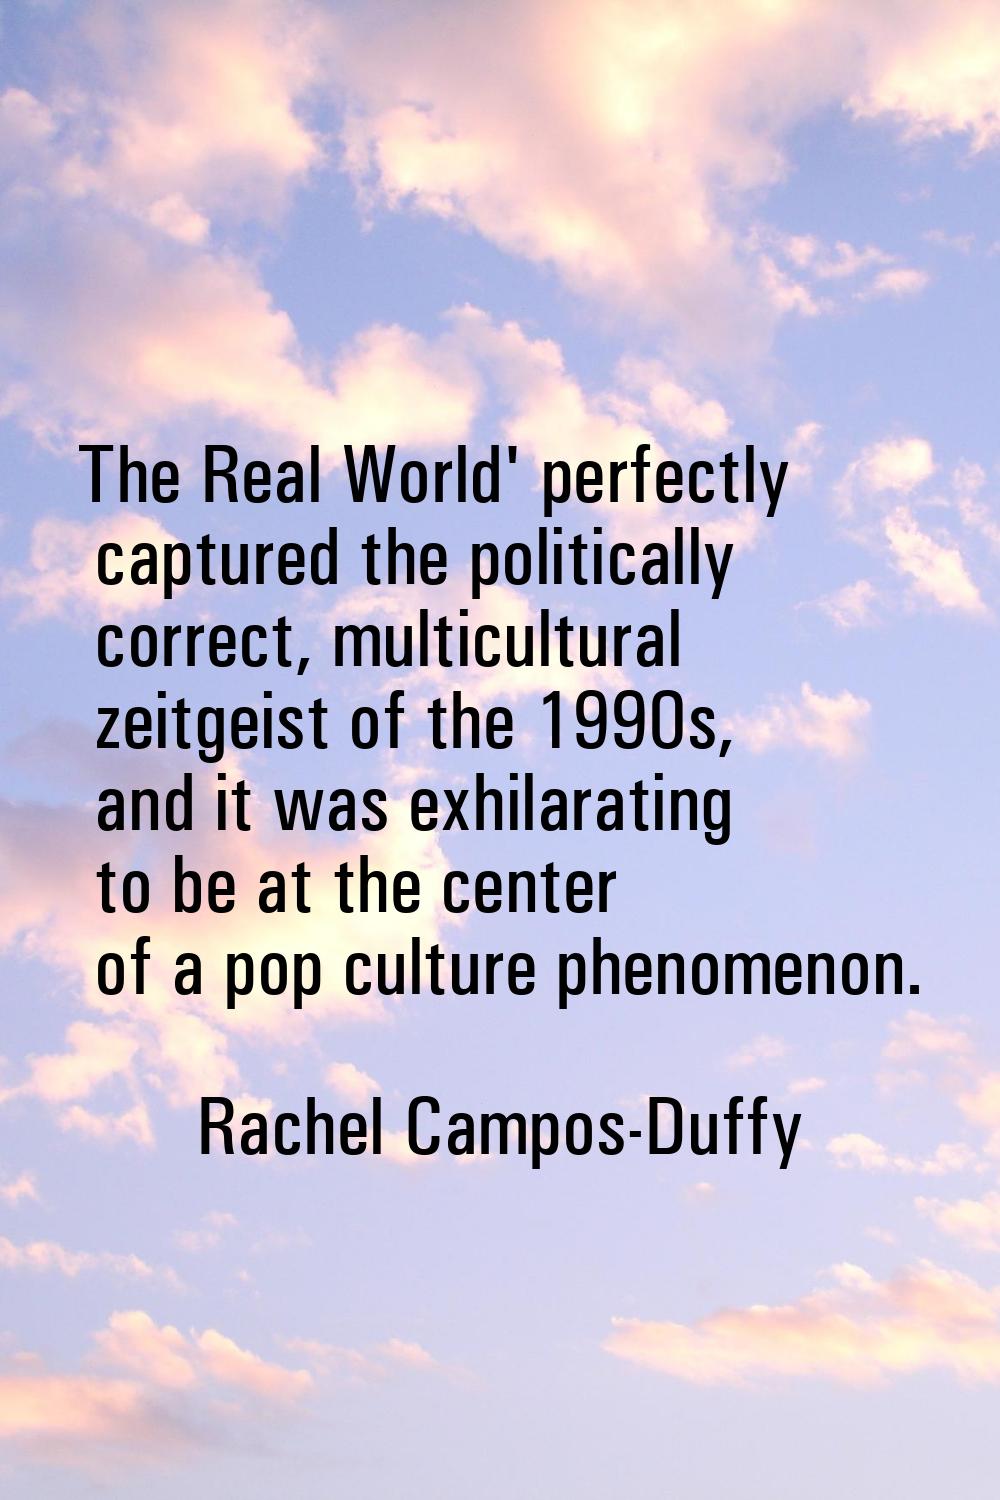 The Real World' perfectly captured the politically correct, multicultural zeitgeist of the 1990s, a